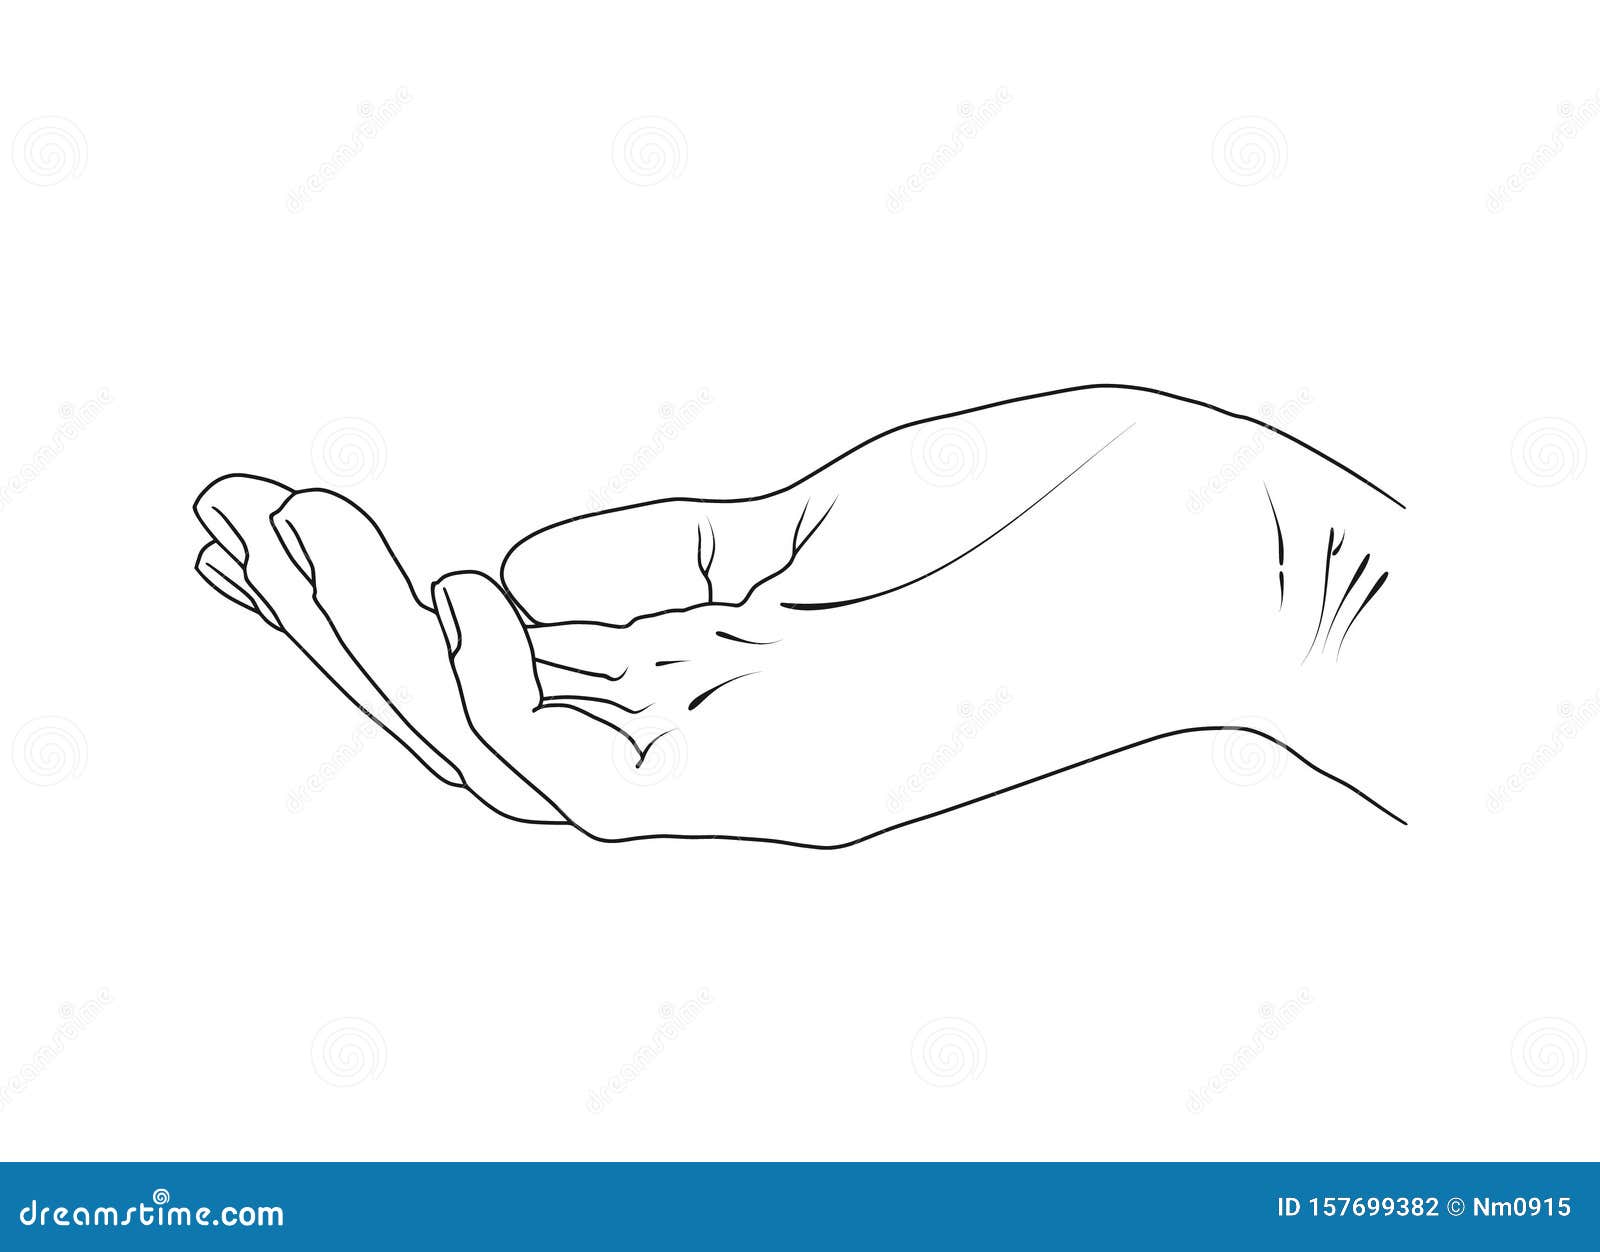 human hand outstretched palm.   sketchy image